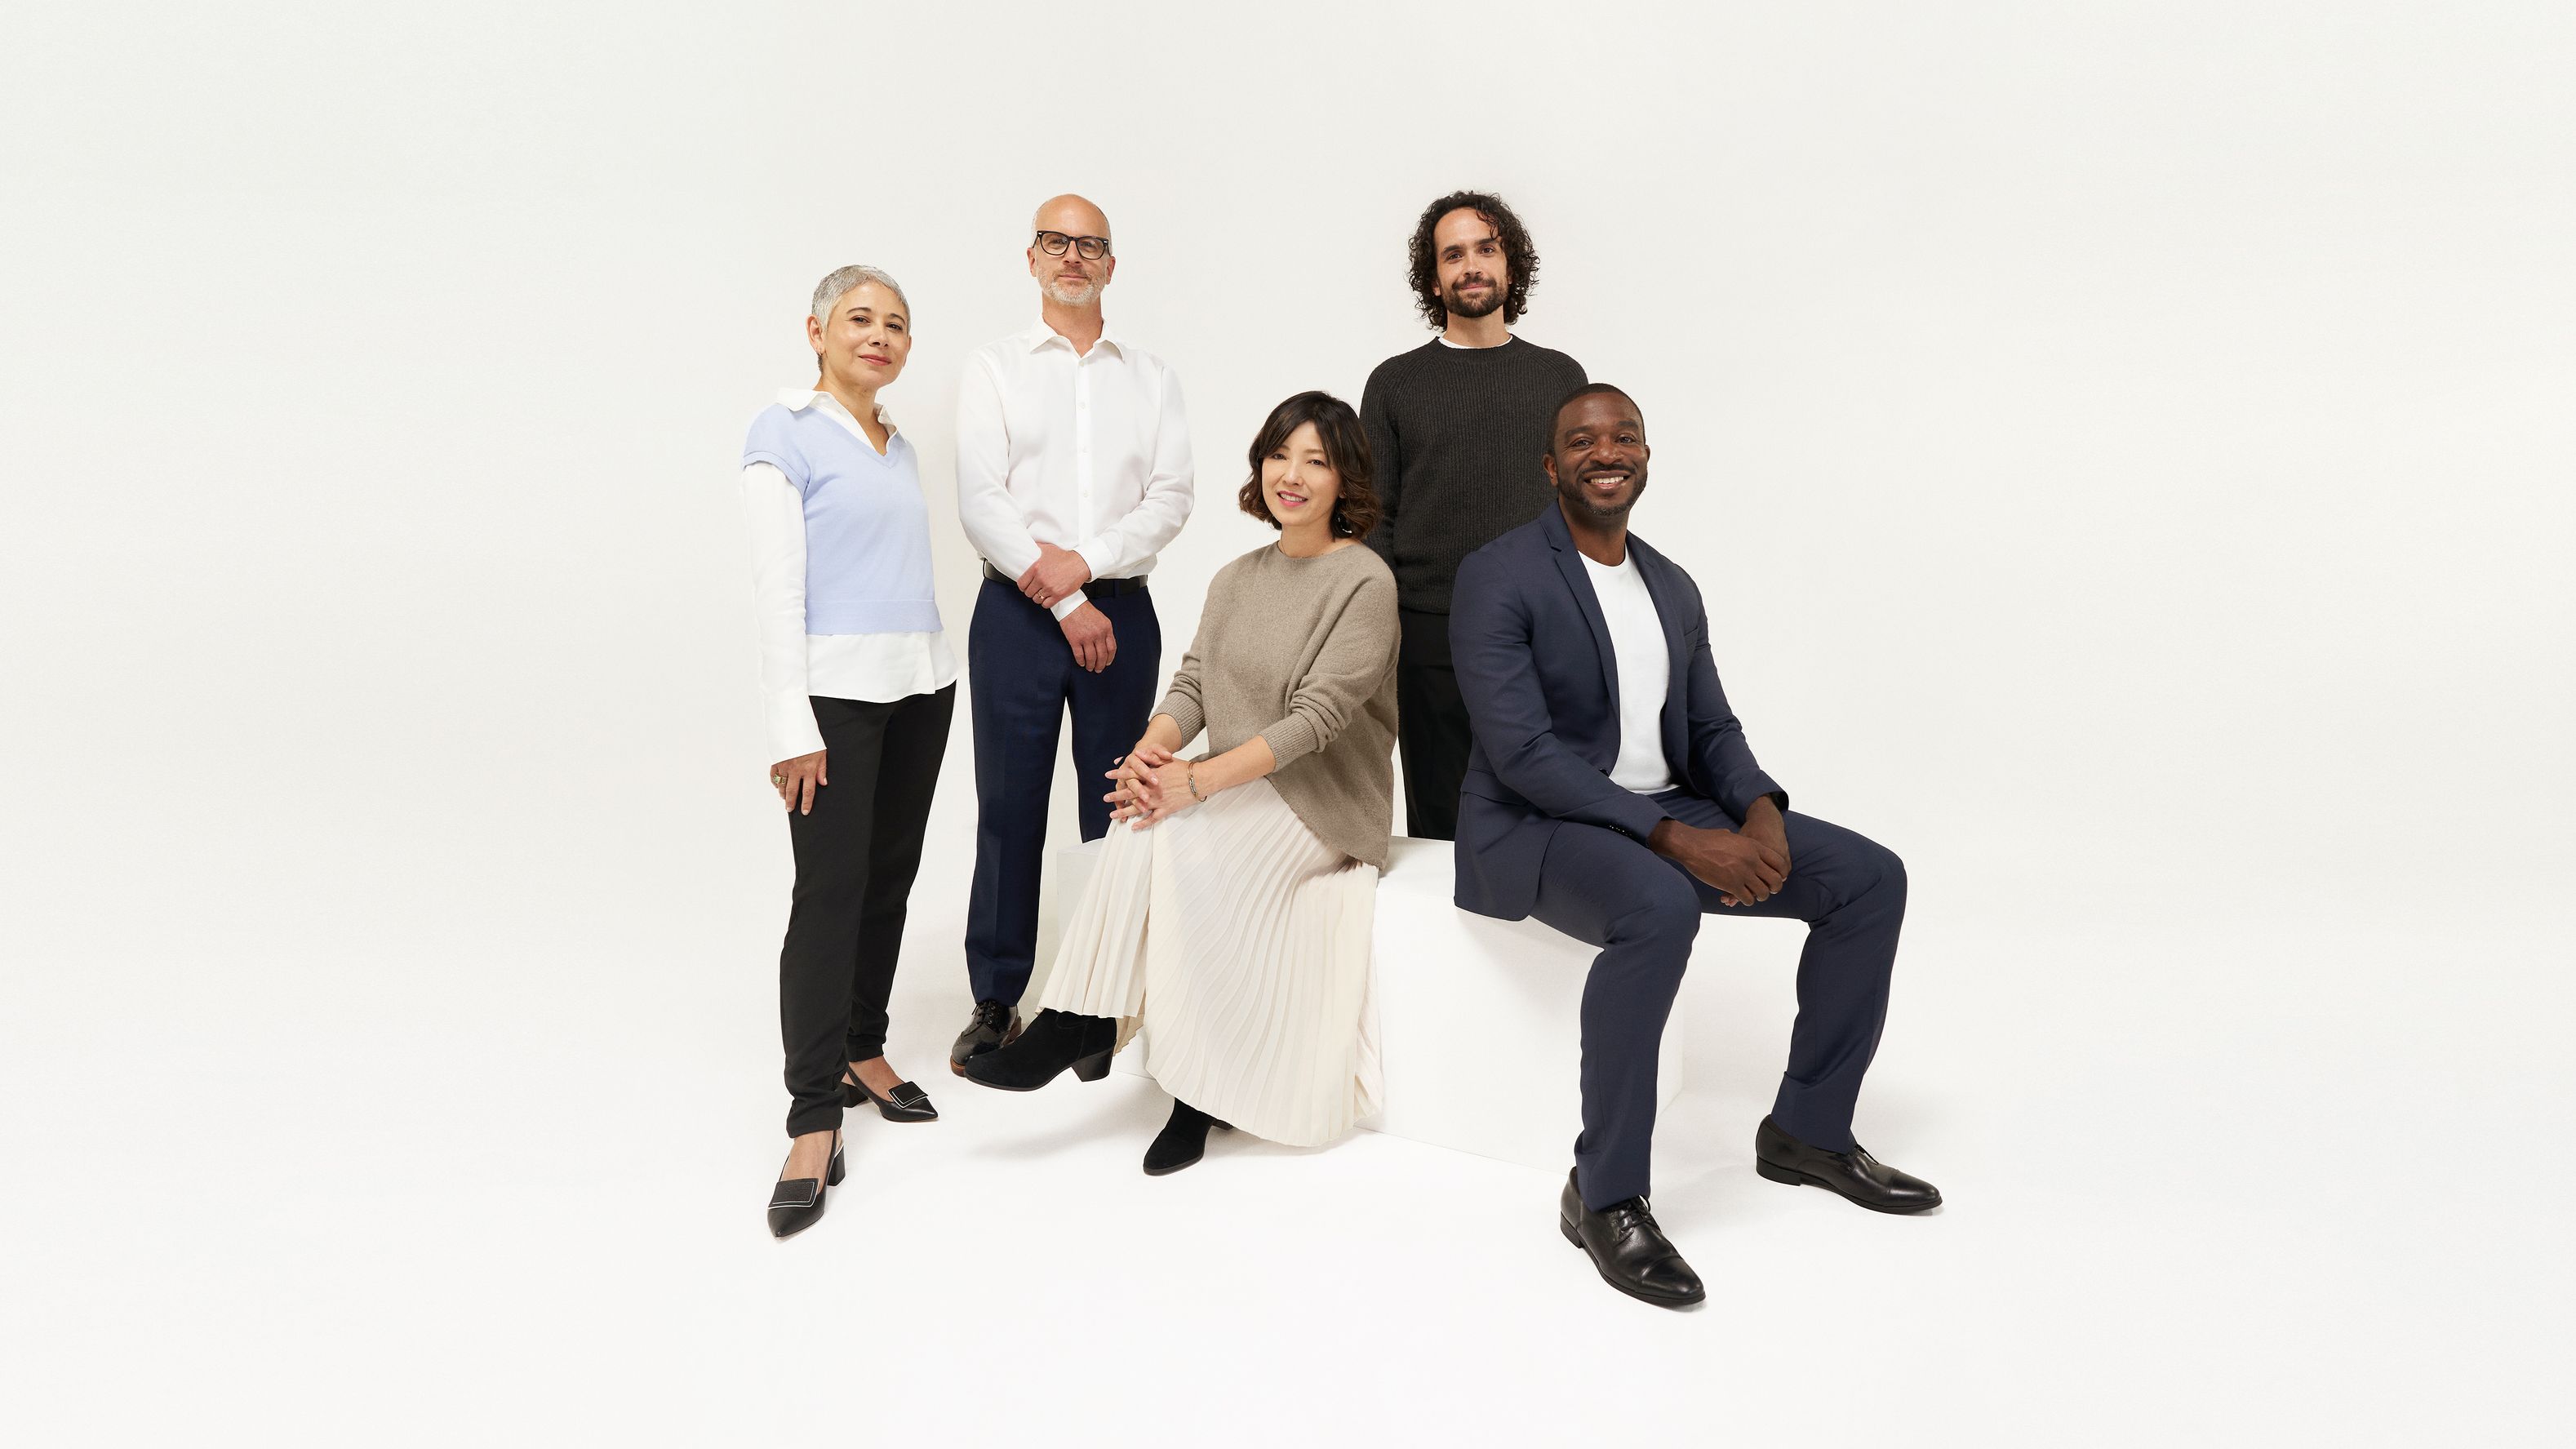 Team photo of five people on white background